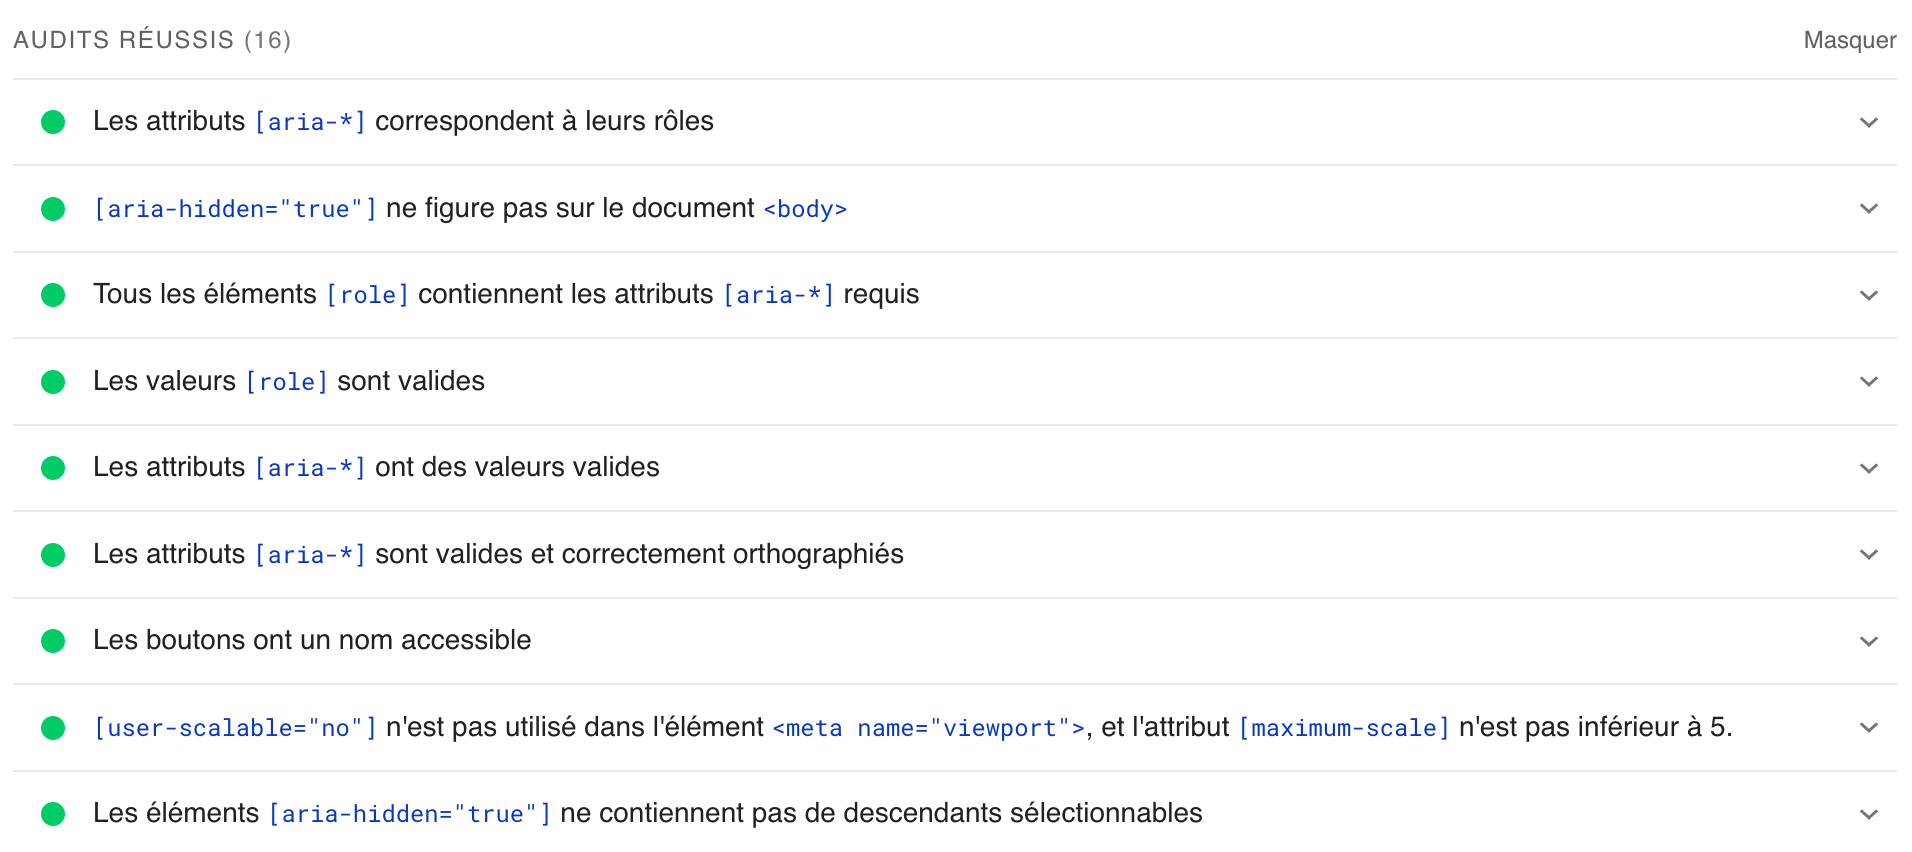 PgaeSpeed Insights propose une section Audits réussis pour vos pages WordPress.